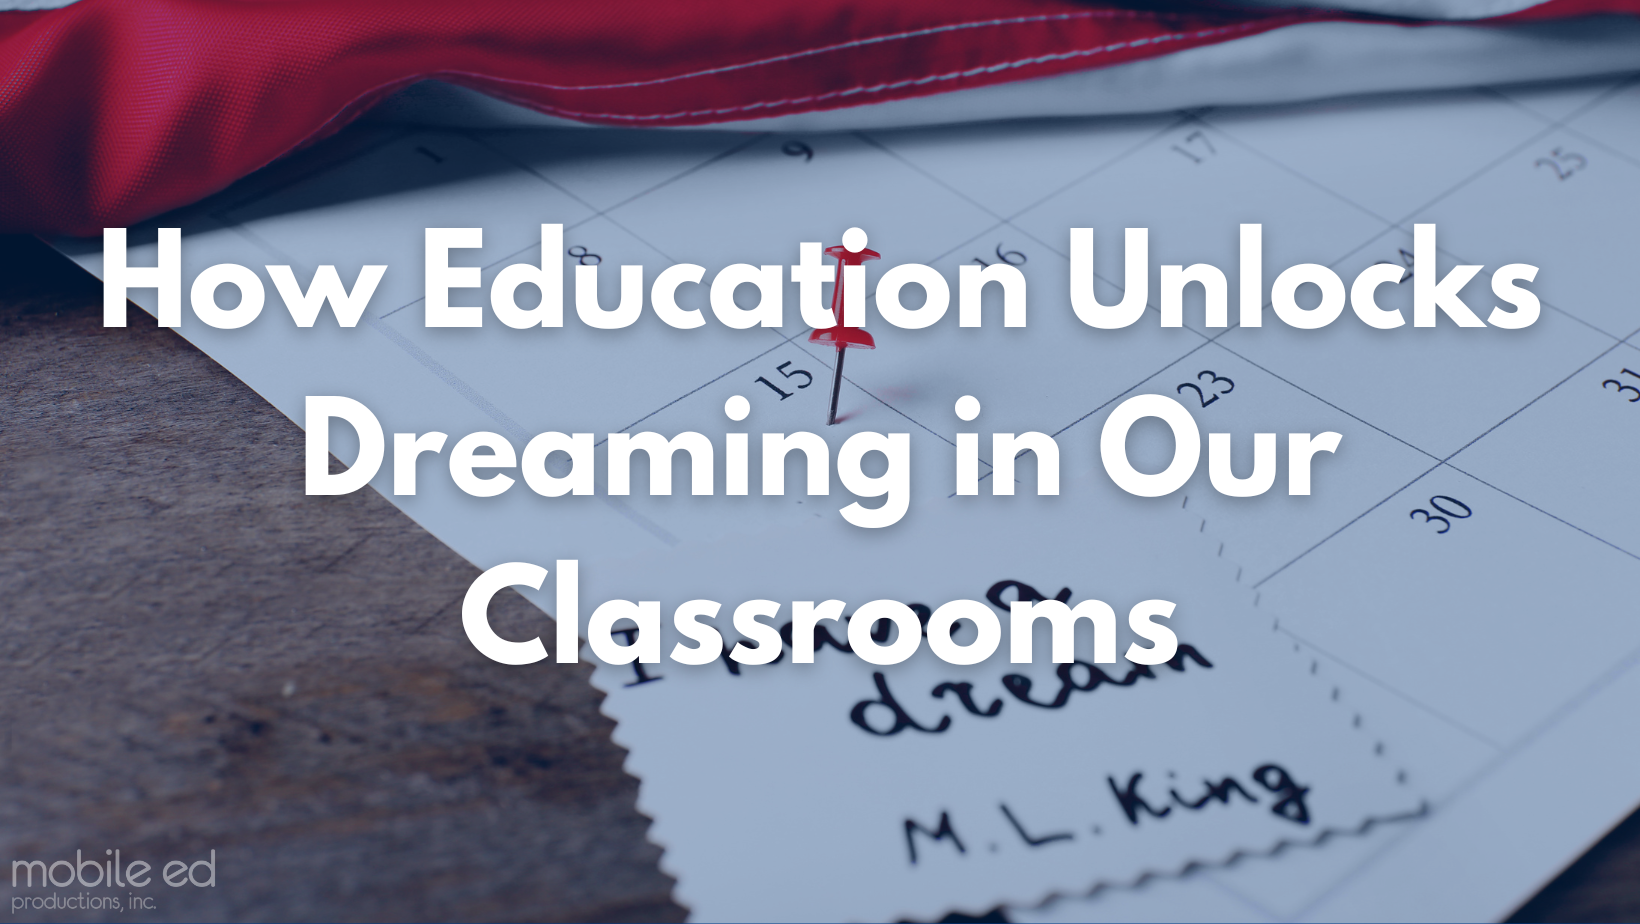 How Education Unlocks Dreaming in Our Classrooms (1)